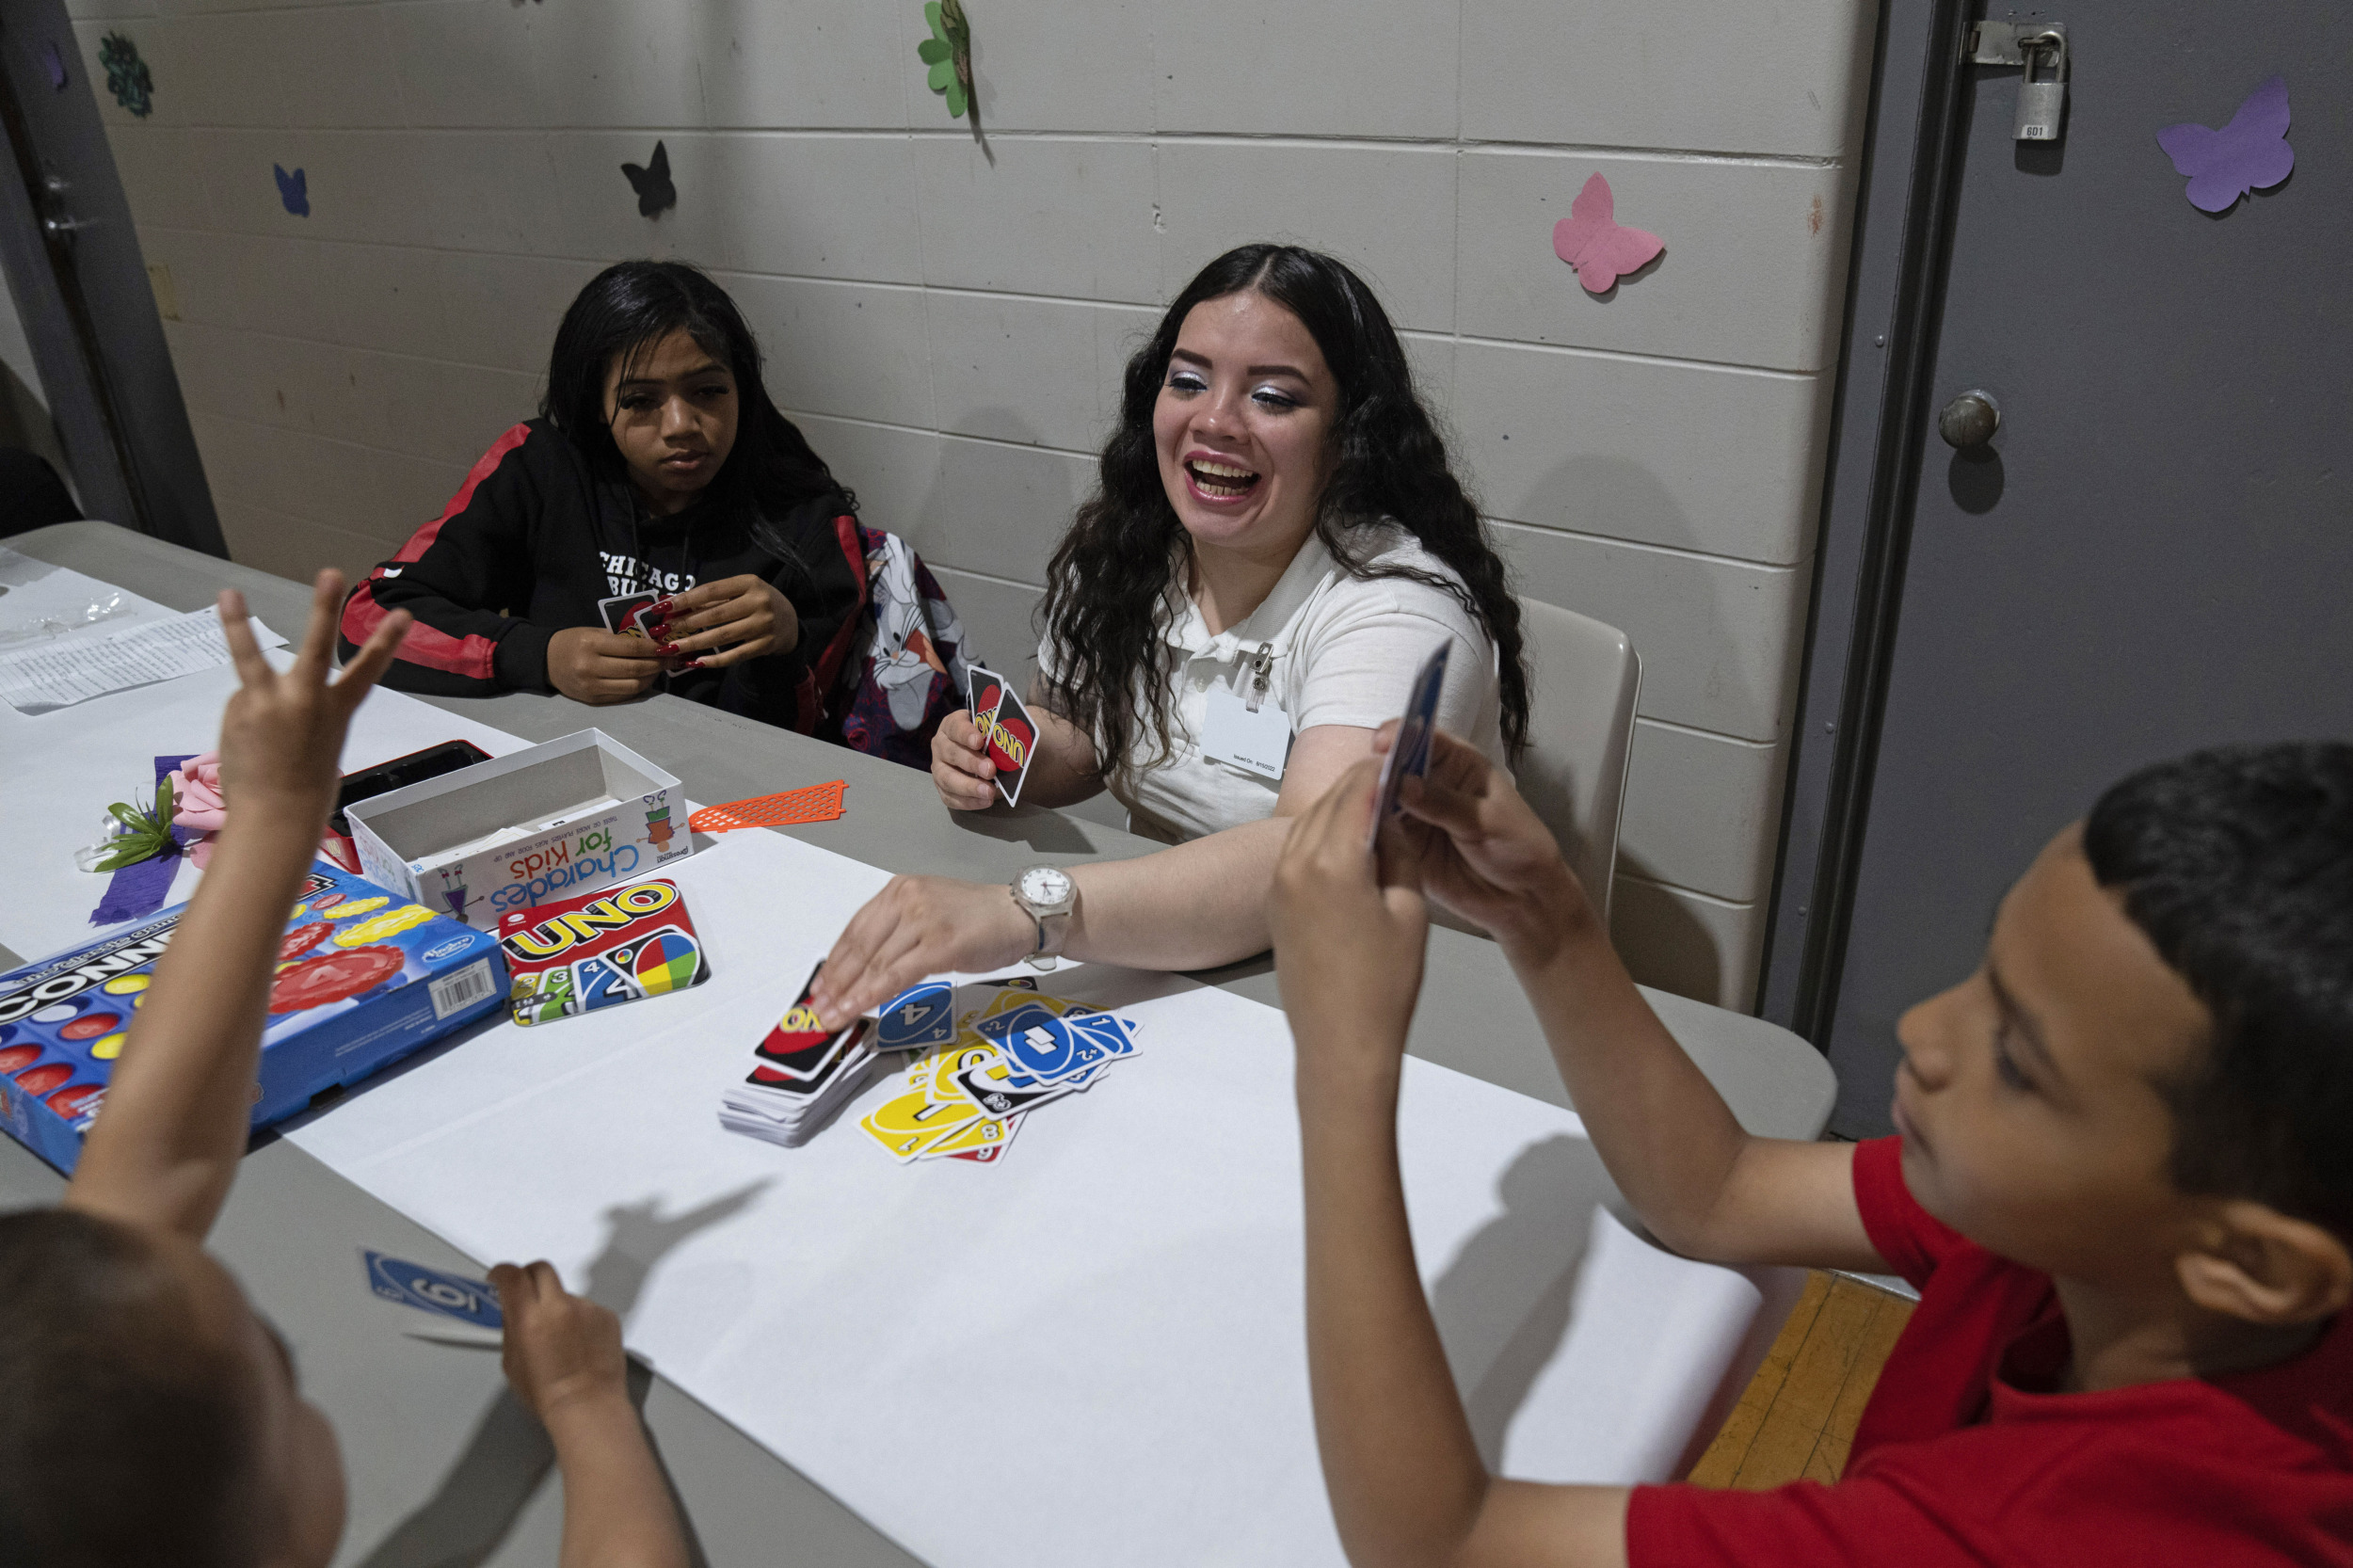 Reunification incarcerated parents: Adult woman with long, dark hair, and three children, sit at table covered with art supplies and games